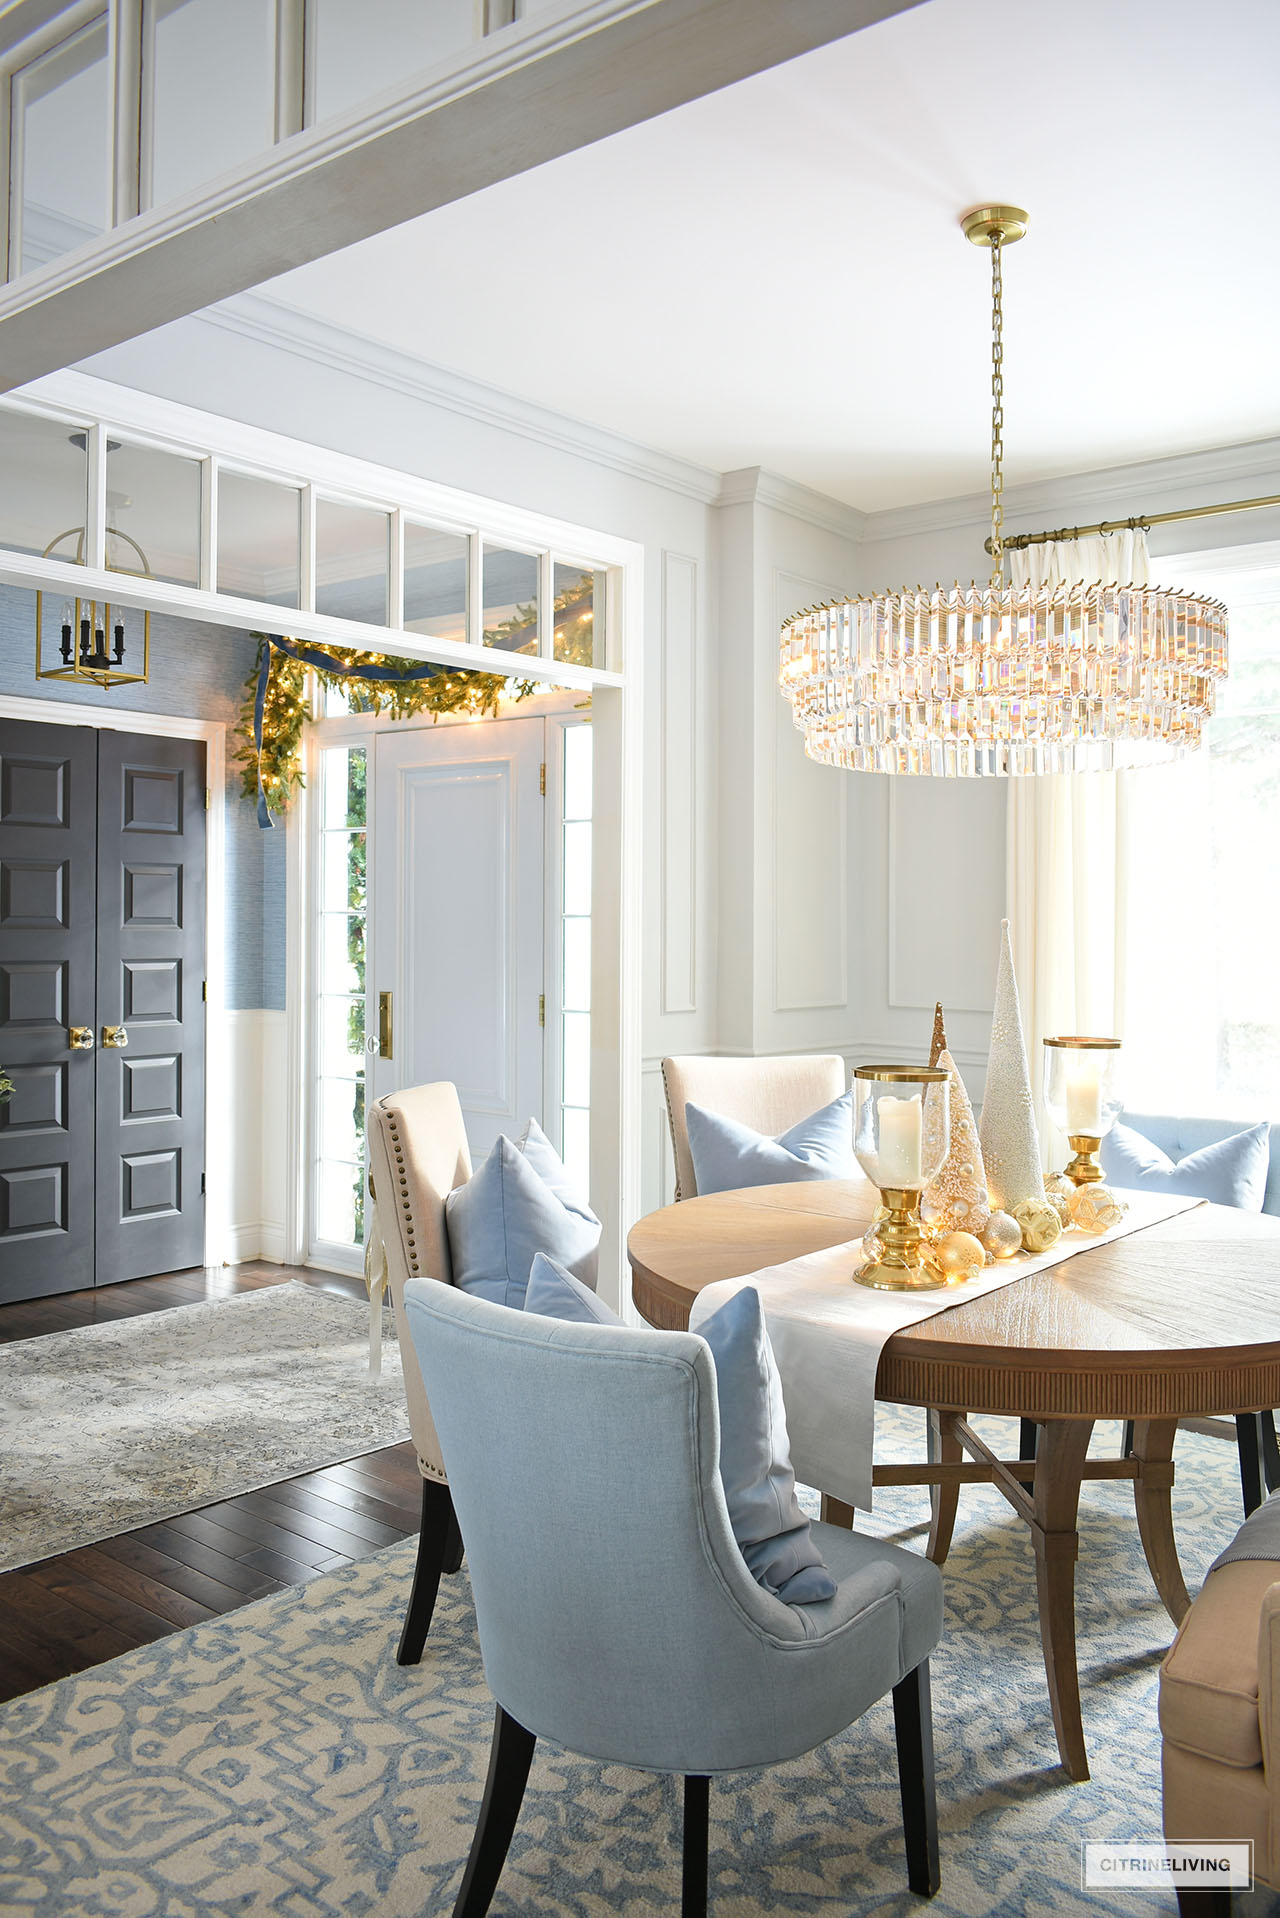 Dining room styled for Christmas with a centerpiece white and gold trees, ornaments and glass hurricanes.